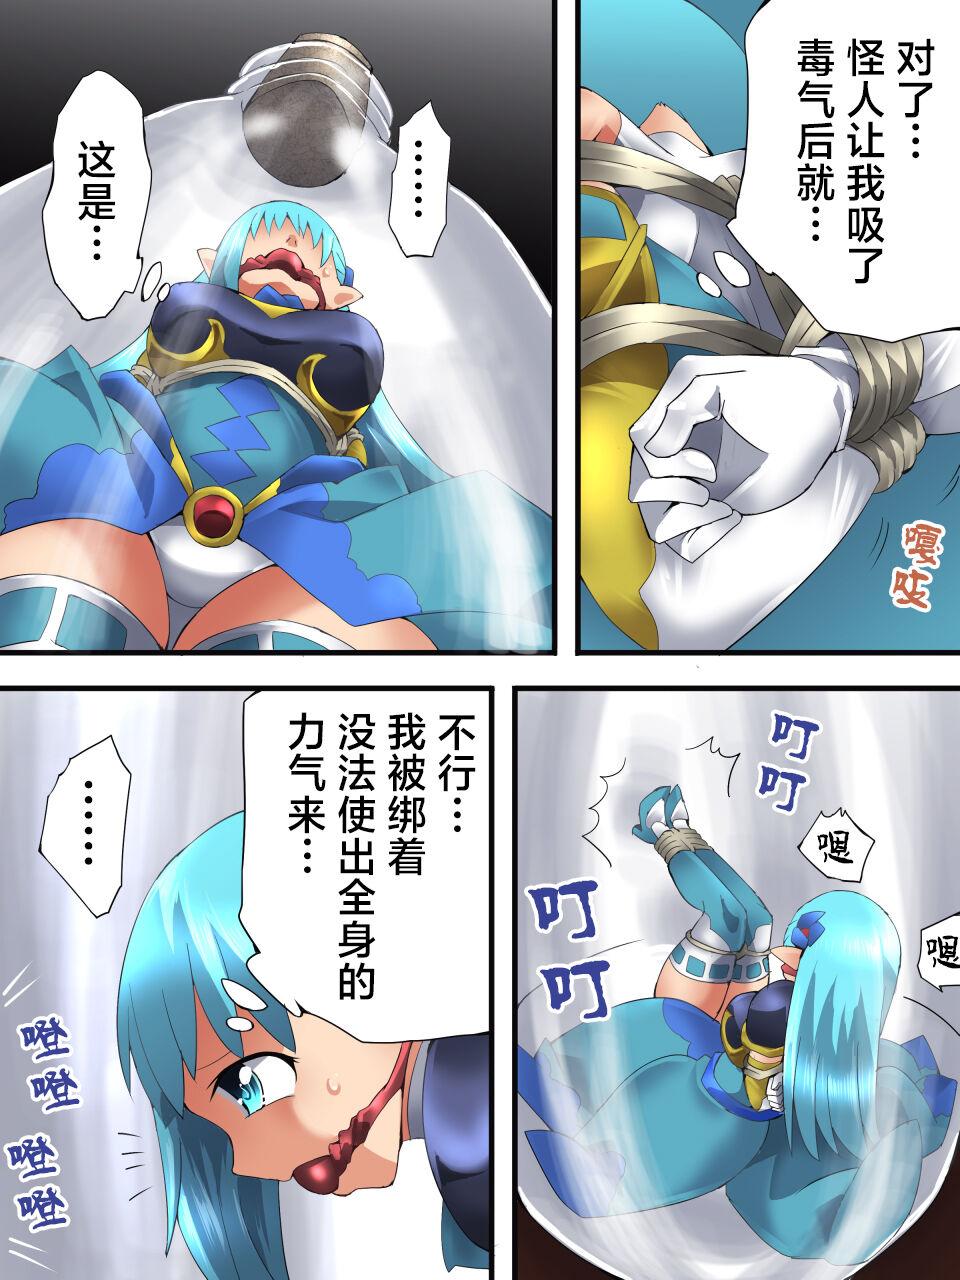 4some Fairy Knight Fairy Bloom Ep3 Chinese Ver. - Original Hair - Page 3